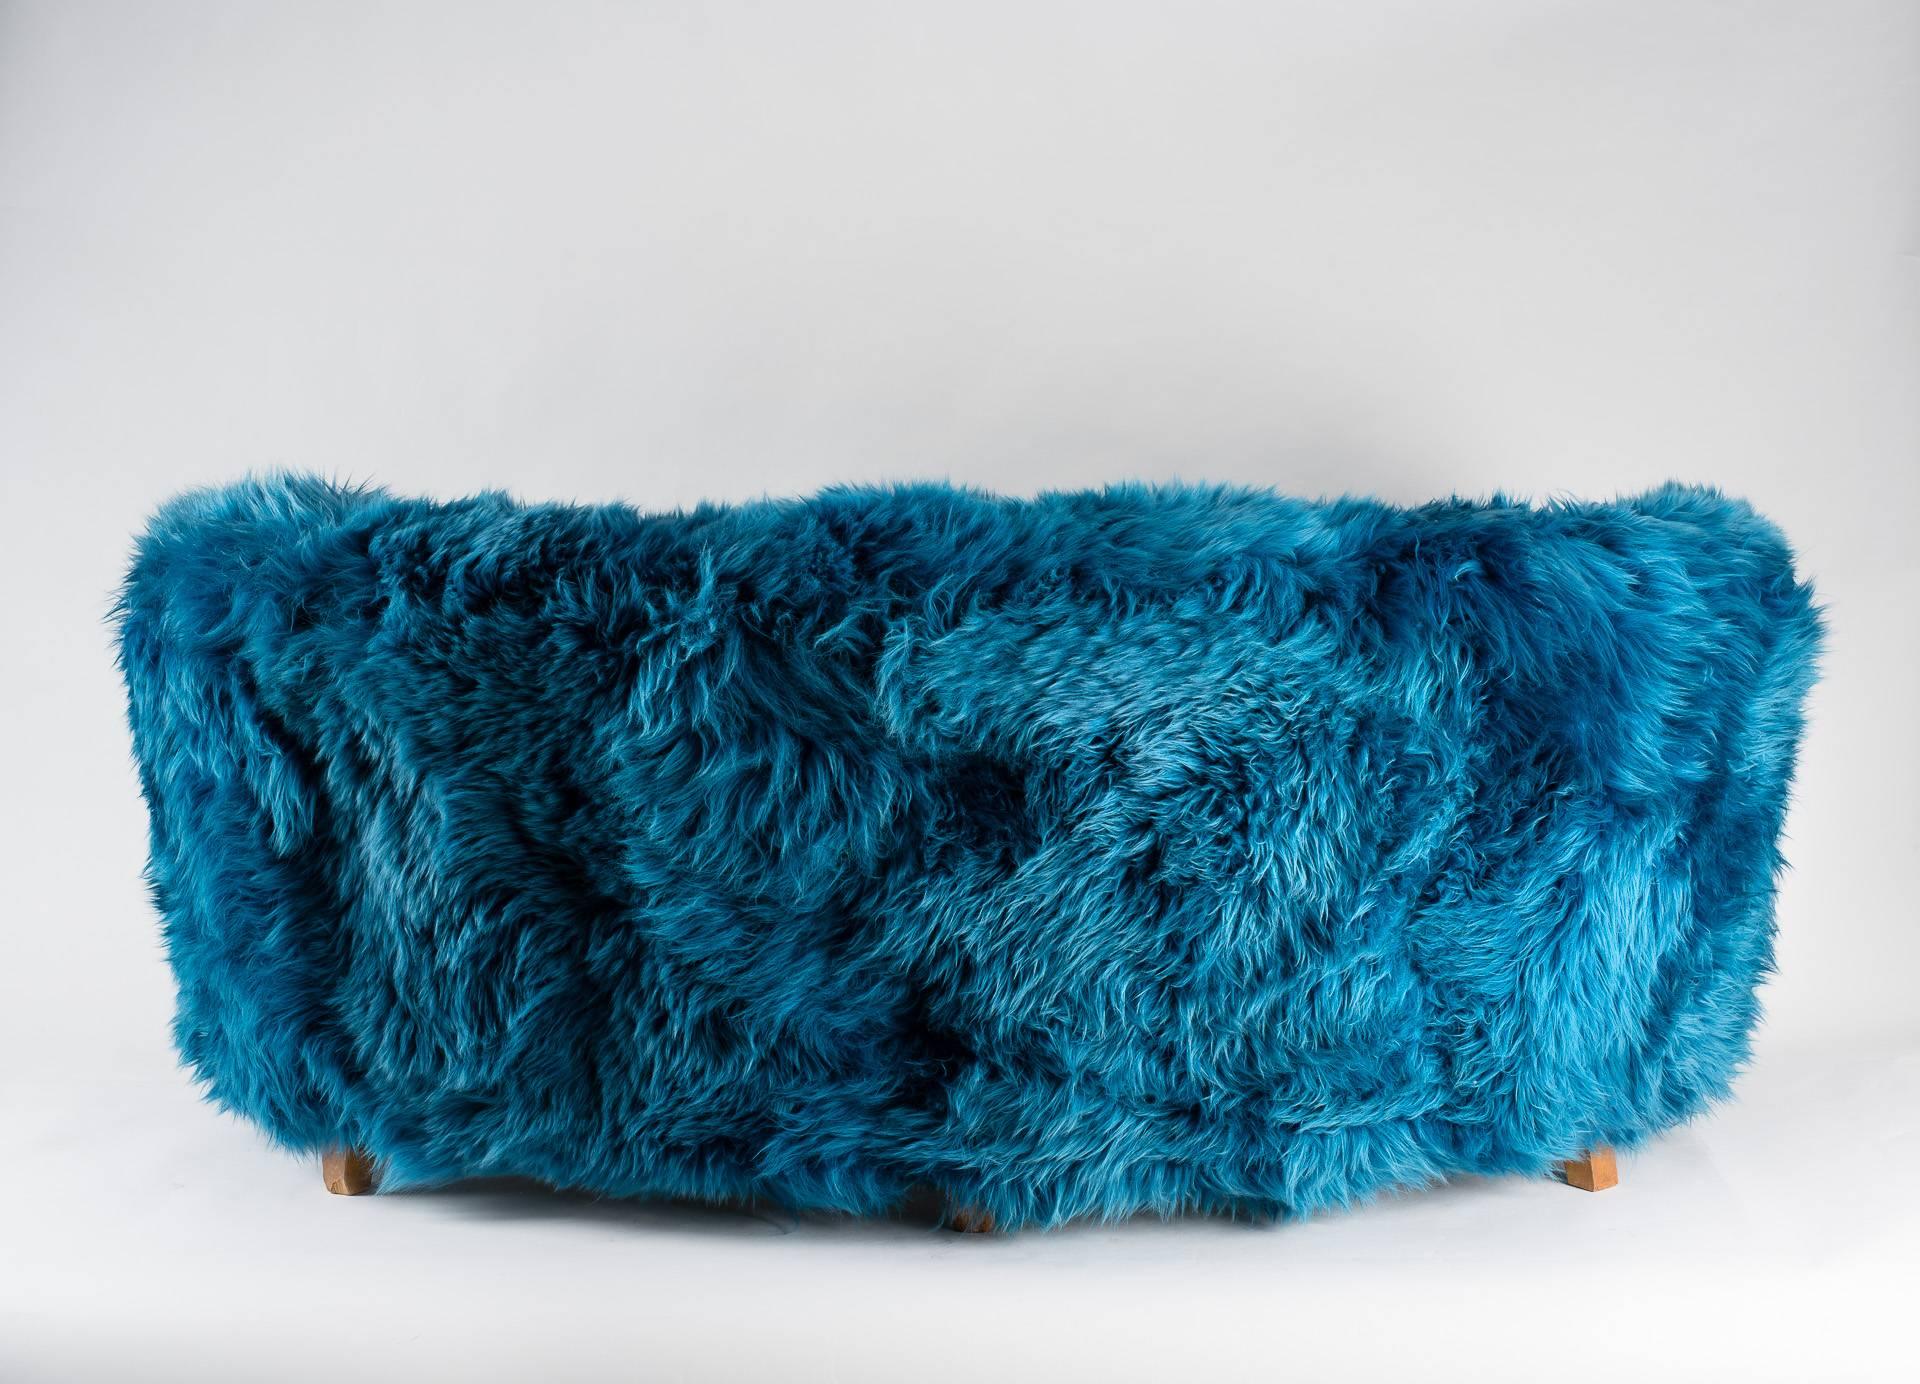 Wonderful Scandinavian sheepskin sofa, circa 1900.
Newly upholstered with turquoise sheepskin.
This blue color brings a spicy touch of modernity.